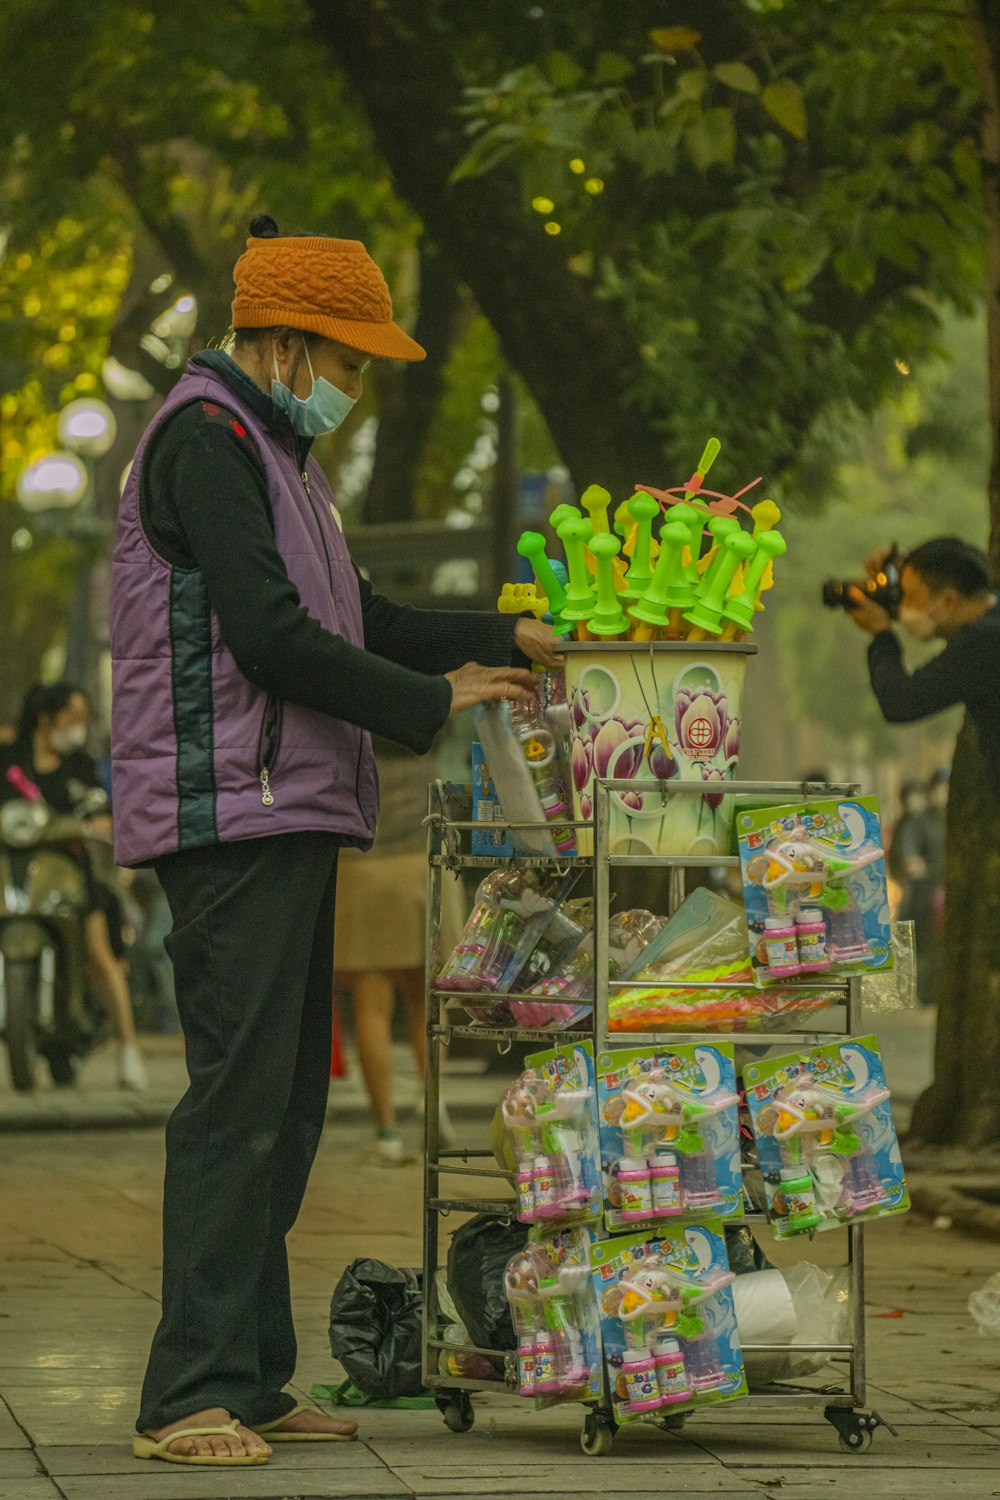 a man in a purple vest and orange hat is pushing a cart full of items